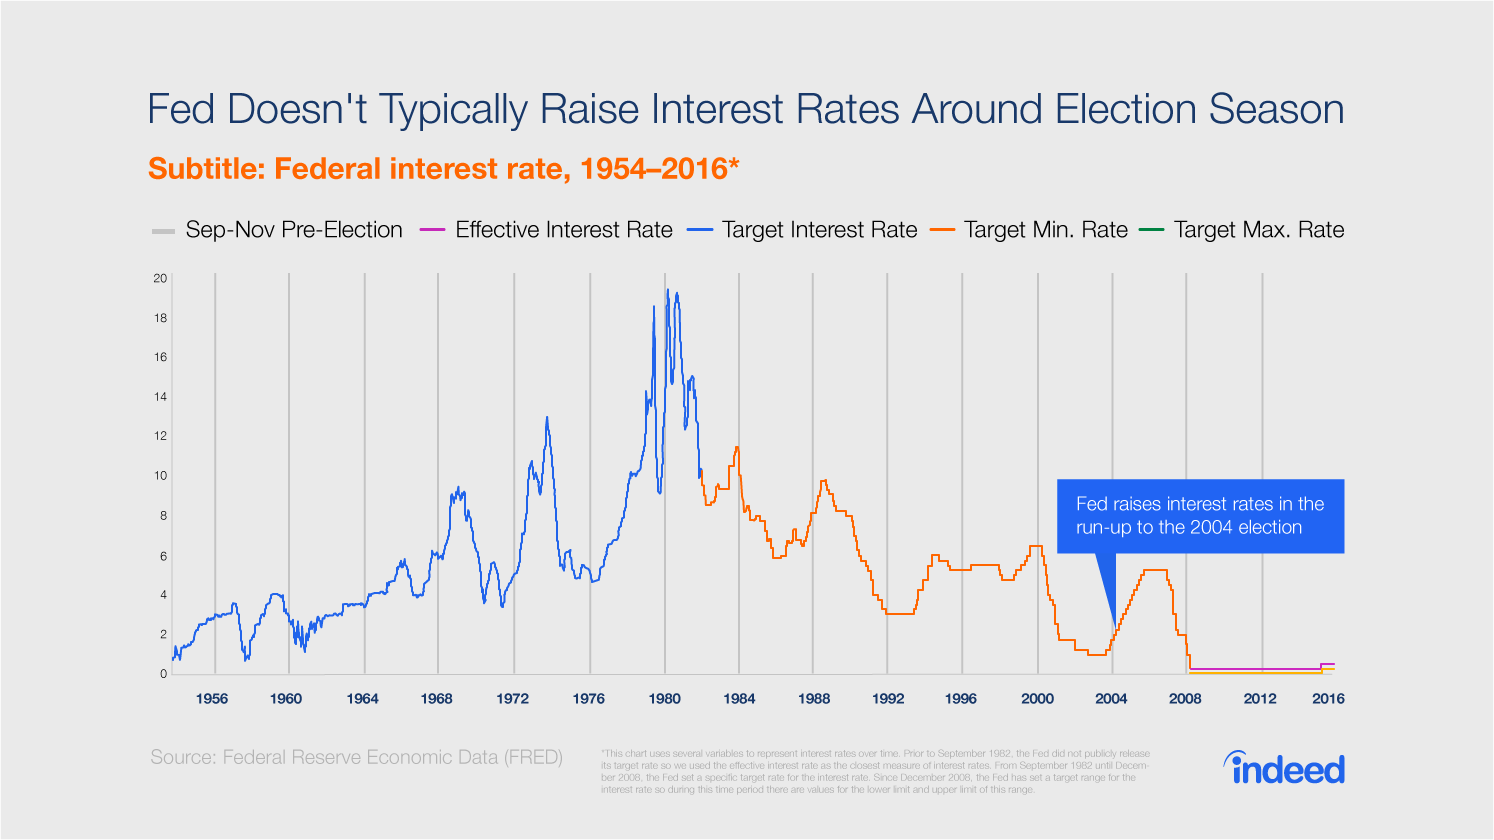 Fed Doesn't Typically Raise Interest Rates Around Election Season